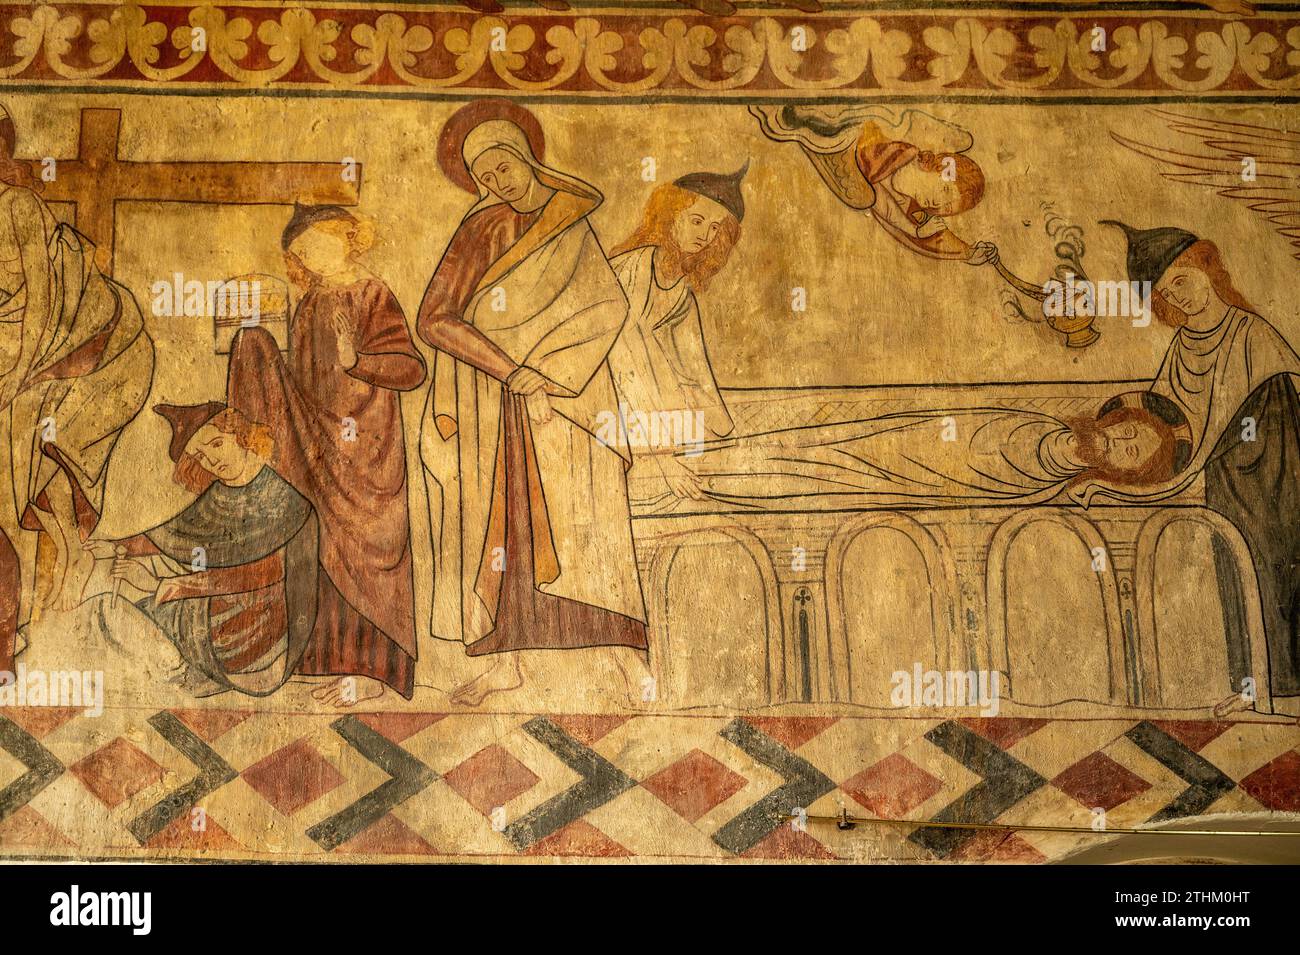 St Agatha's wall paintings at Easby Abbey in England Stock Photo